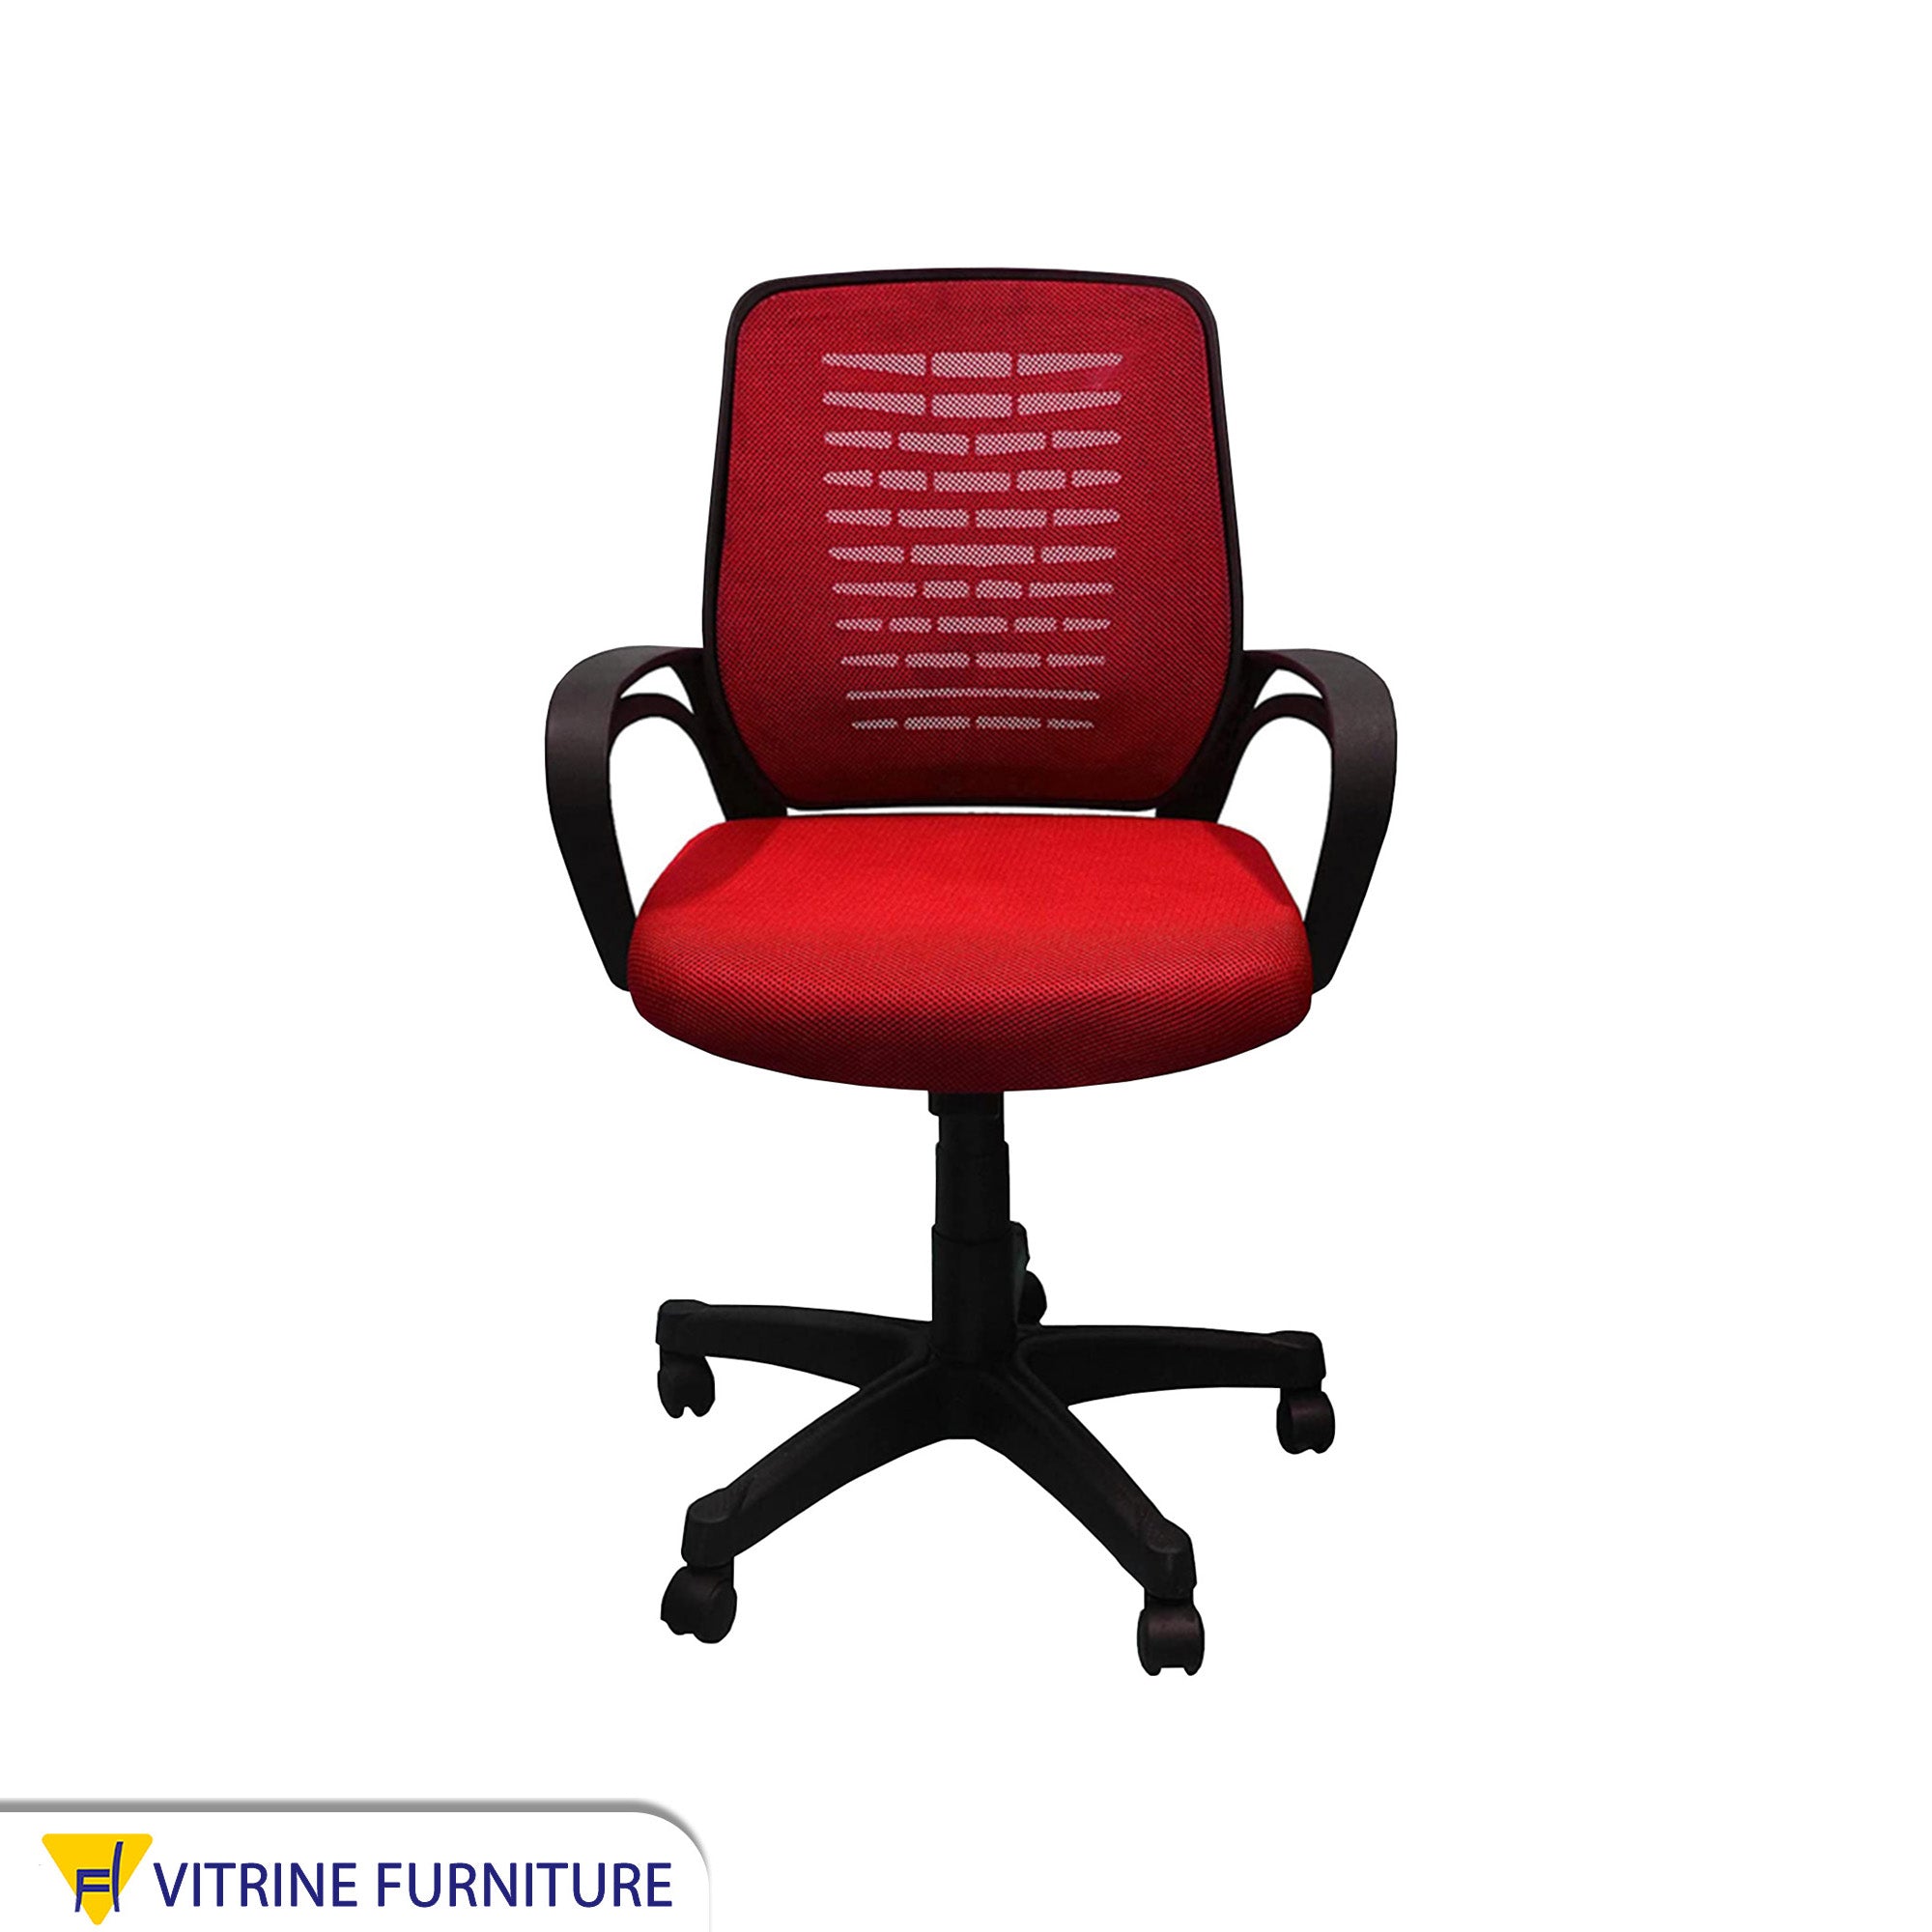 Red office chair